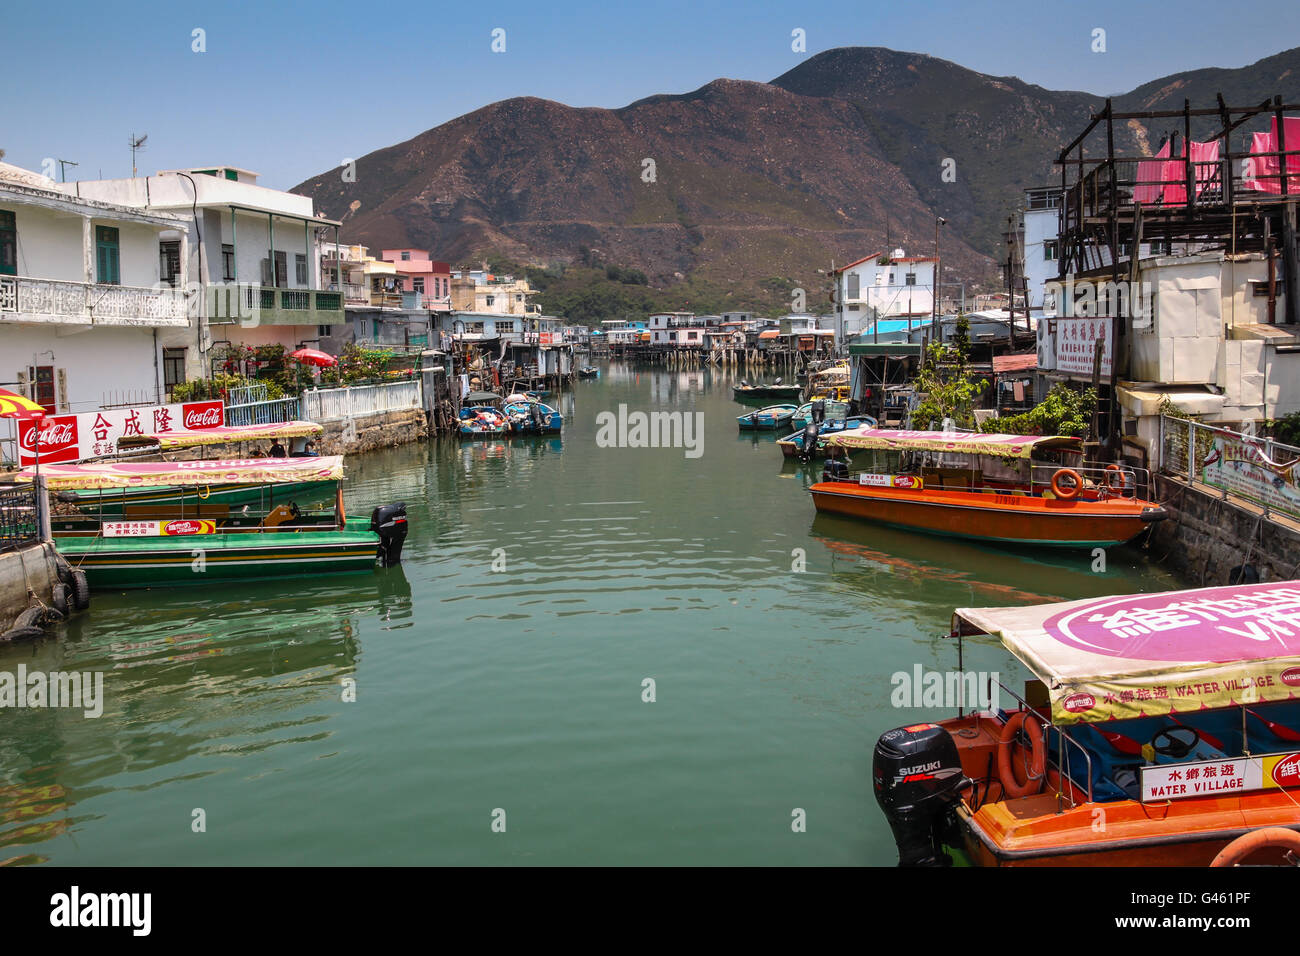 Hong Kong - April 10, 2011: Houses on stilts above the tidal flats of Lantau Island are homes to the Tanka people in Tai O. Stock Photo